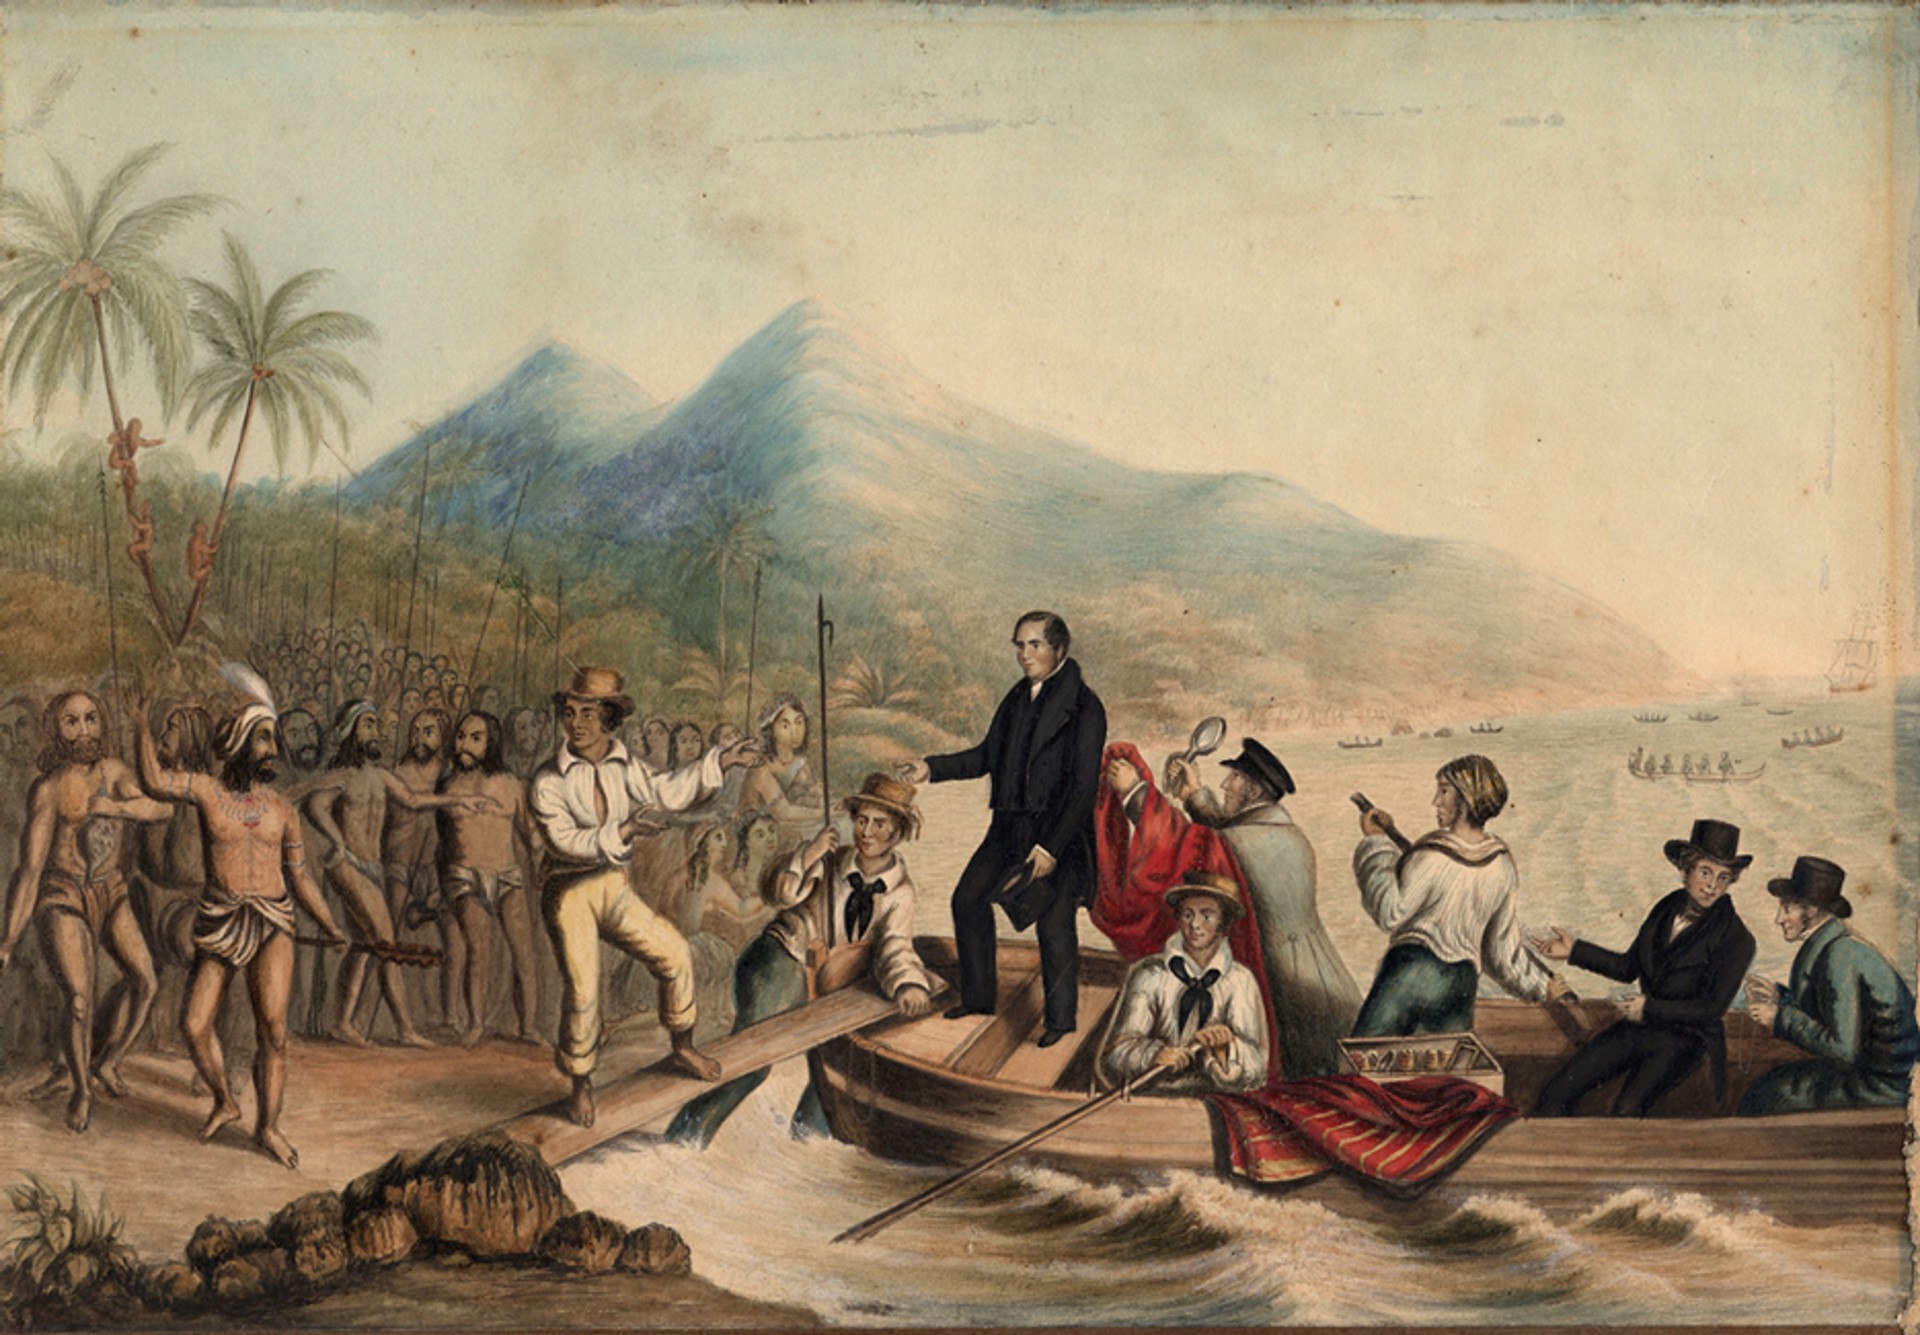 The Reverend J. Williams at Tanna, In the South Seas, The Day Before He was Massacred. by George Baxter